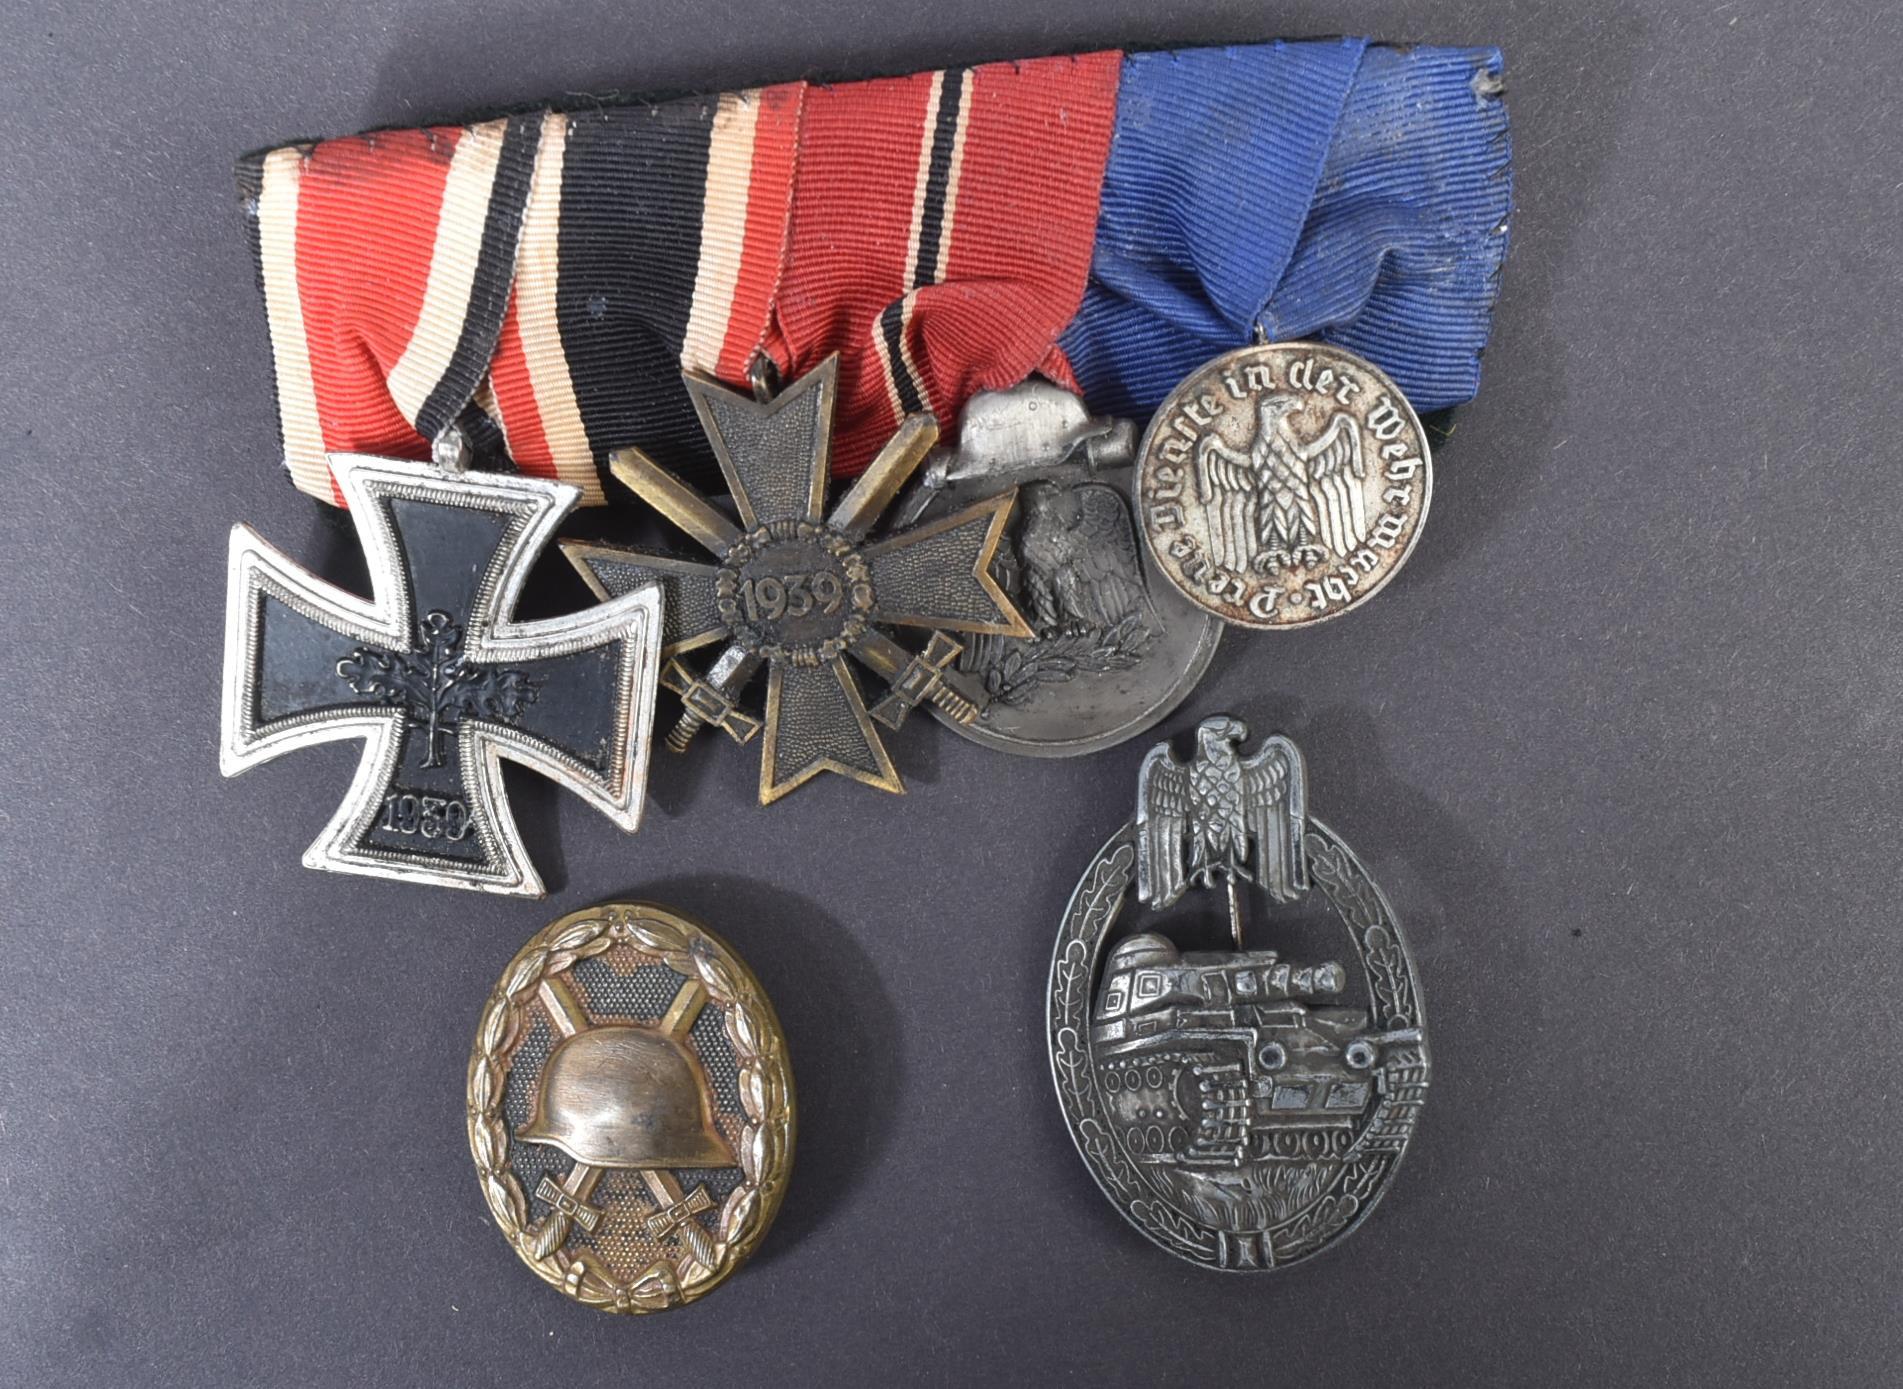 POST WWII SECOND WORLD WAR GERMAN DENAZIFIED MEDAL GROUP